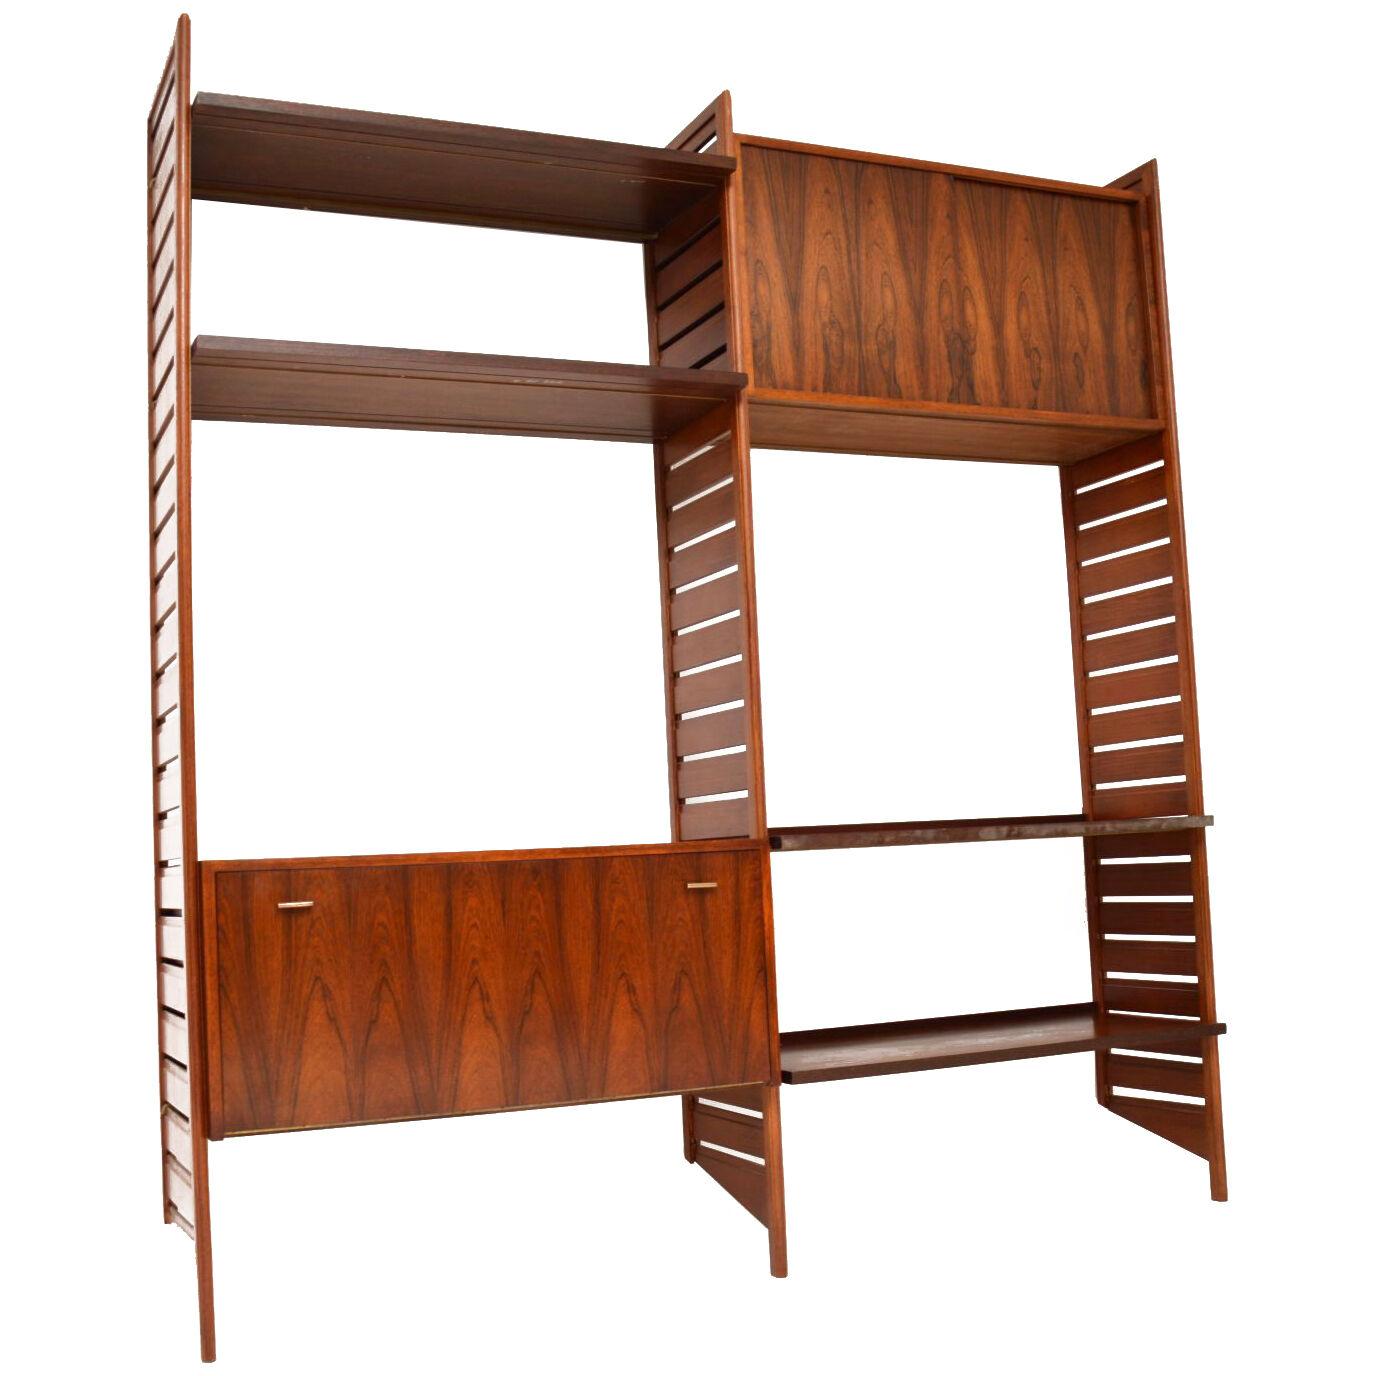 1960's Vintage Rosewood Ladderax Wall Unit Cabinet / Bookcase